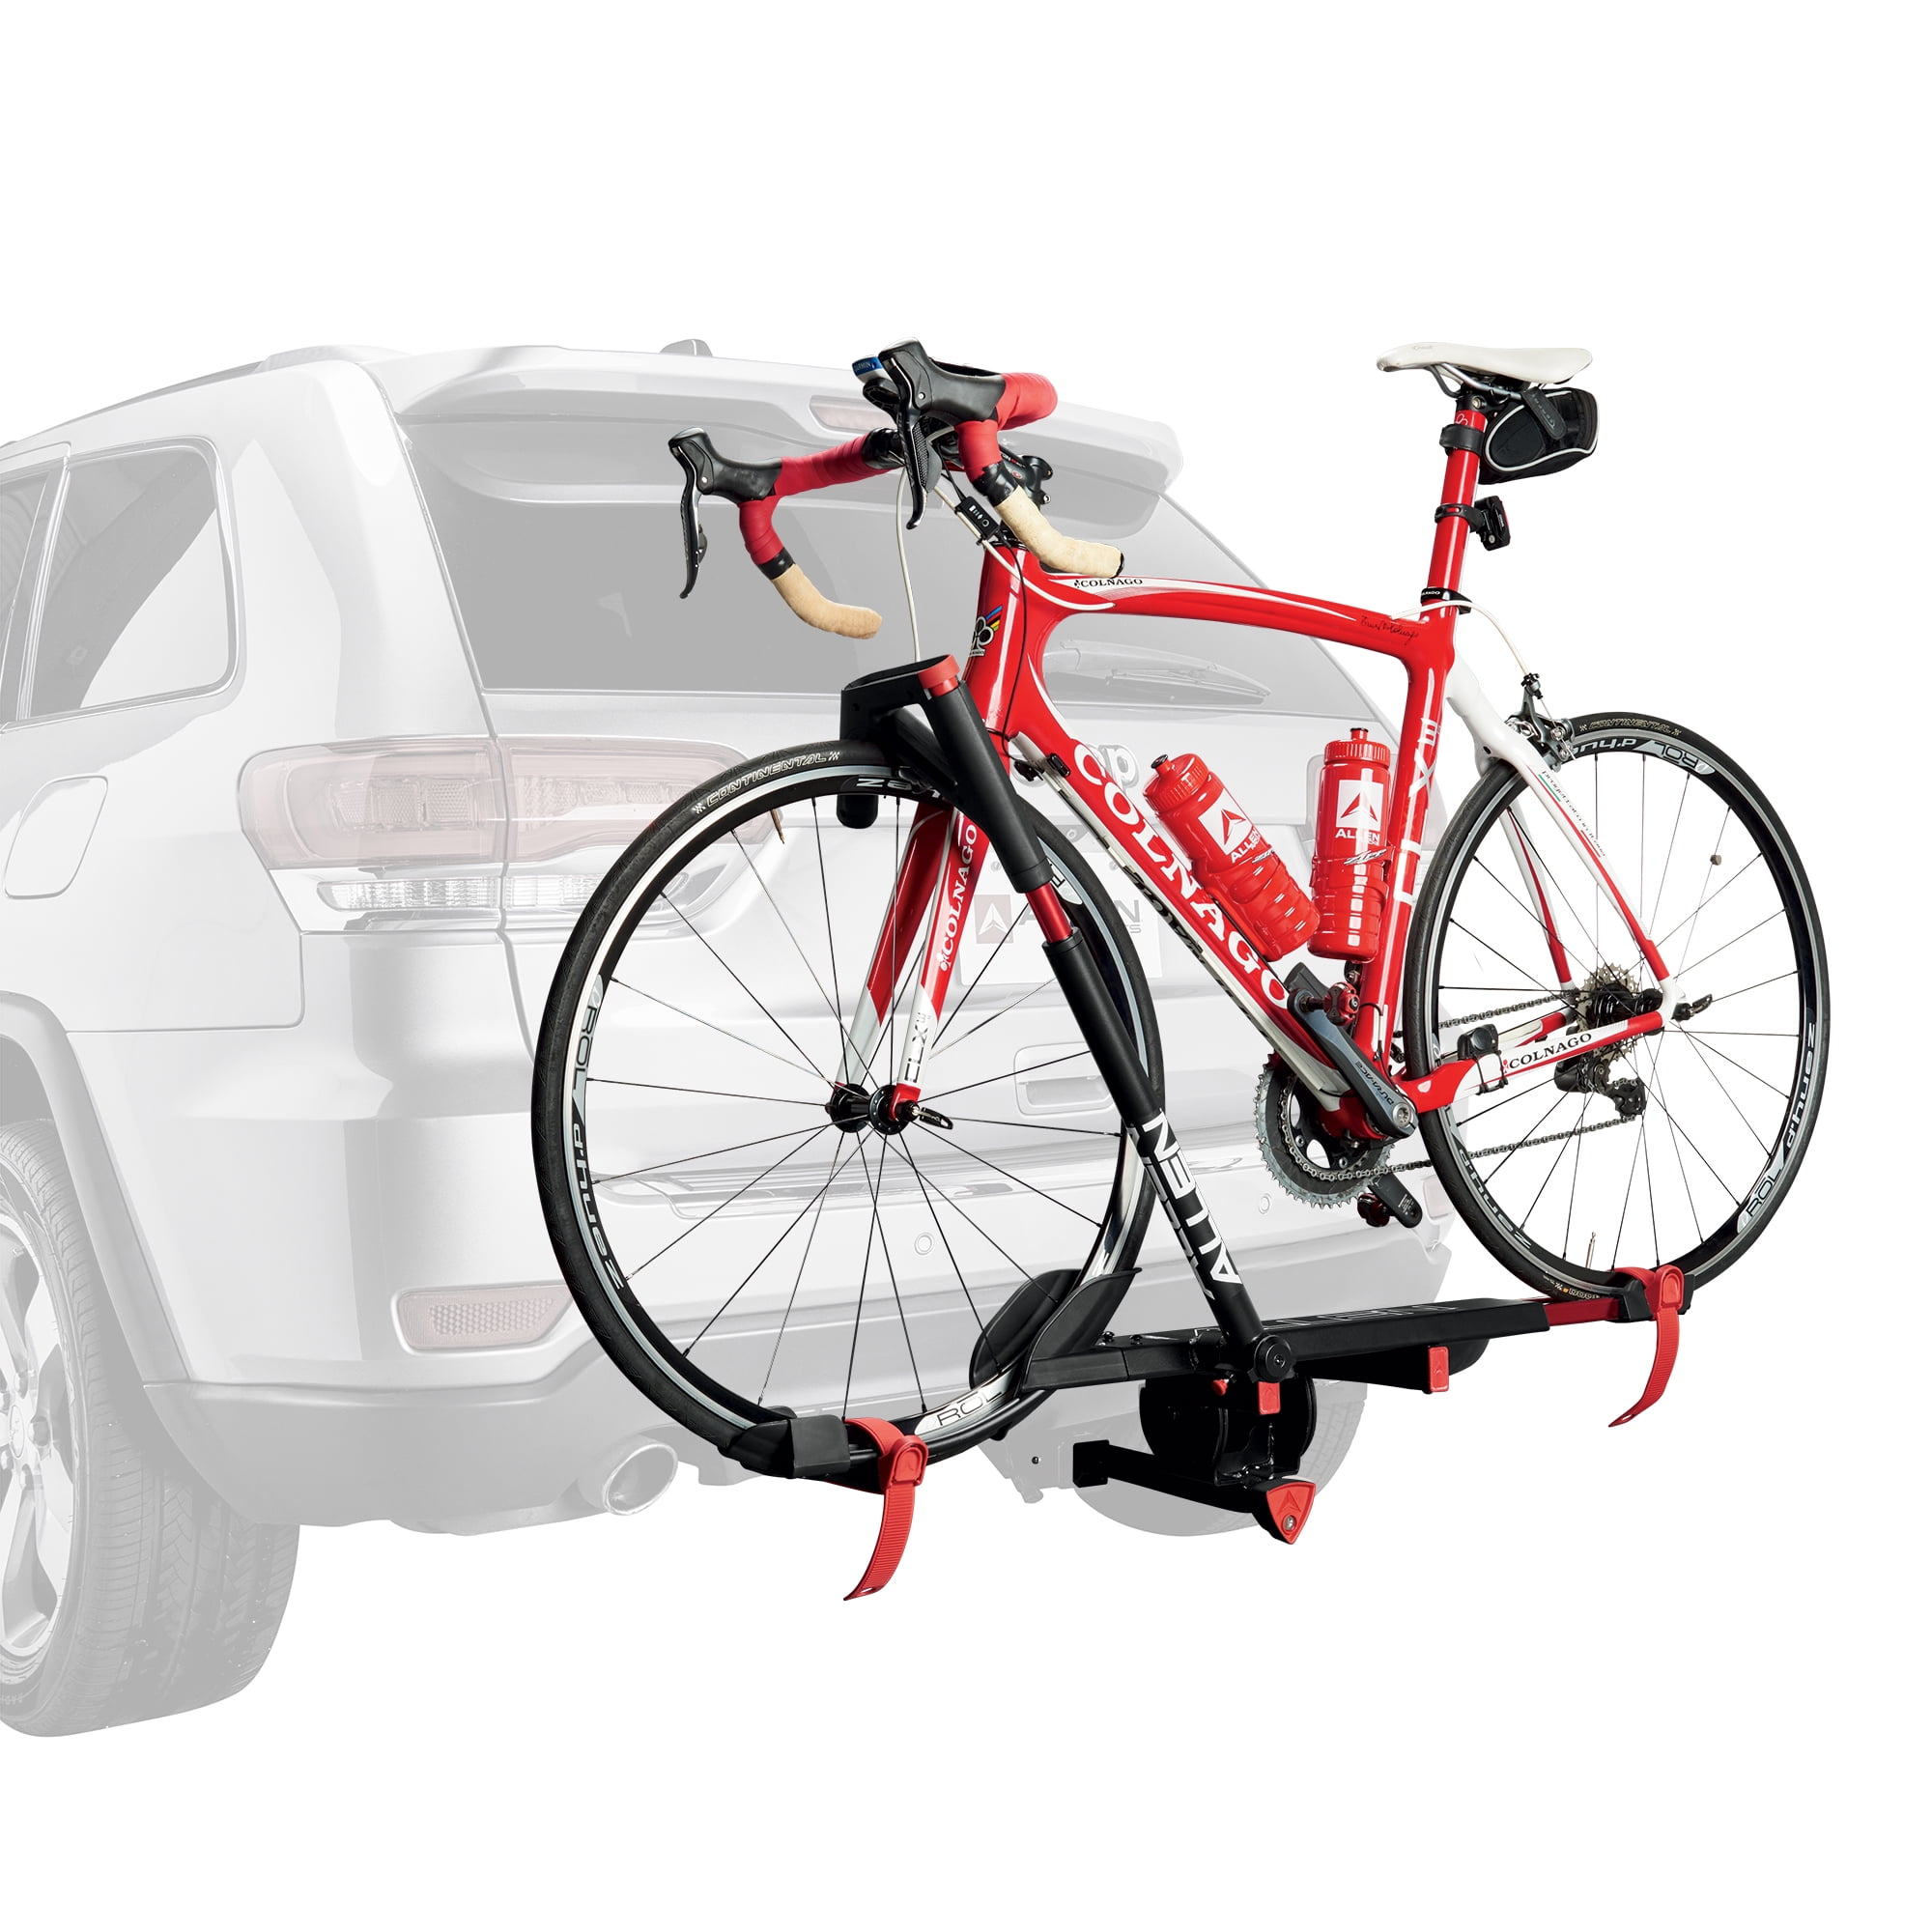 Bike rack For suv Or Cars With Hitch Receivers 2” Or 1 1/4”  Holds Up to 3 Bikes 